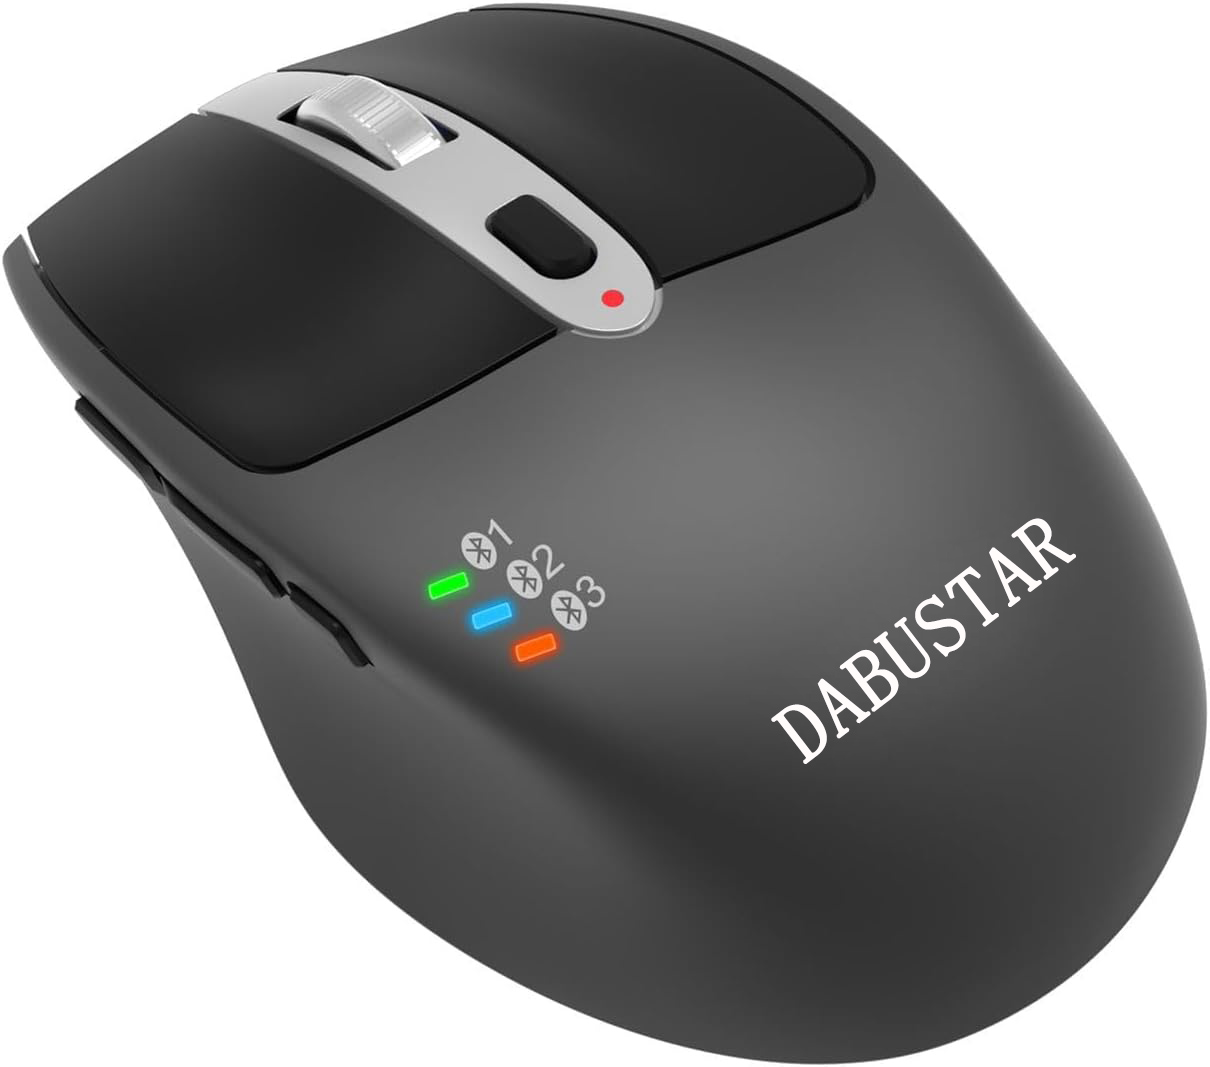 DABUSTAR Wearable computer peripherals in the nature of wireless mice Multi-Device Wireless Bluetooth Mouse Ergonomic Silent Clicking Backward Forward for Desktop PC Laptop Mac iPad Build in Rechargeable Battery